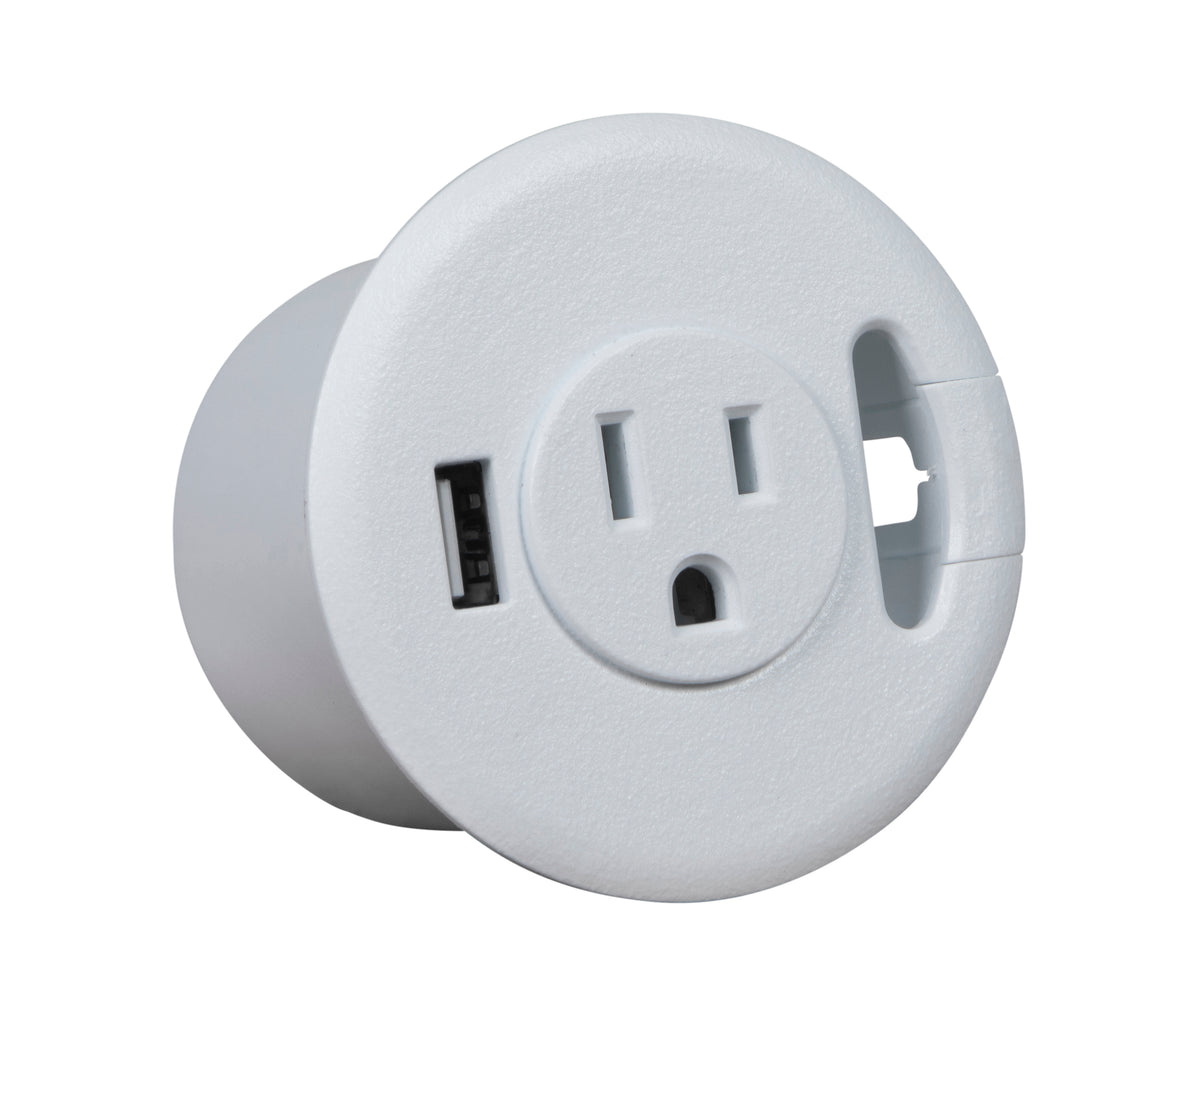 Table Top Power &amp; USB Grommet Hole Adapter, White